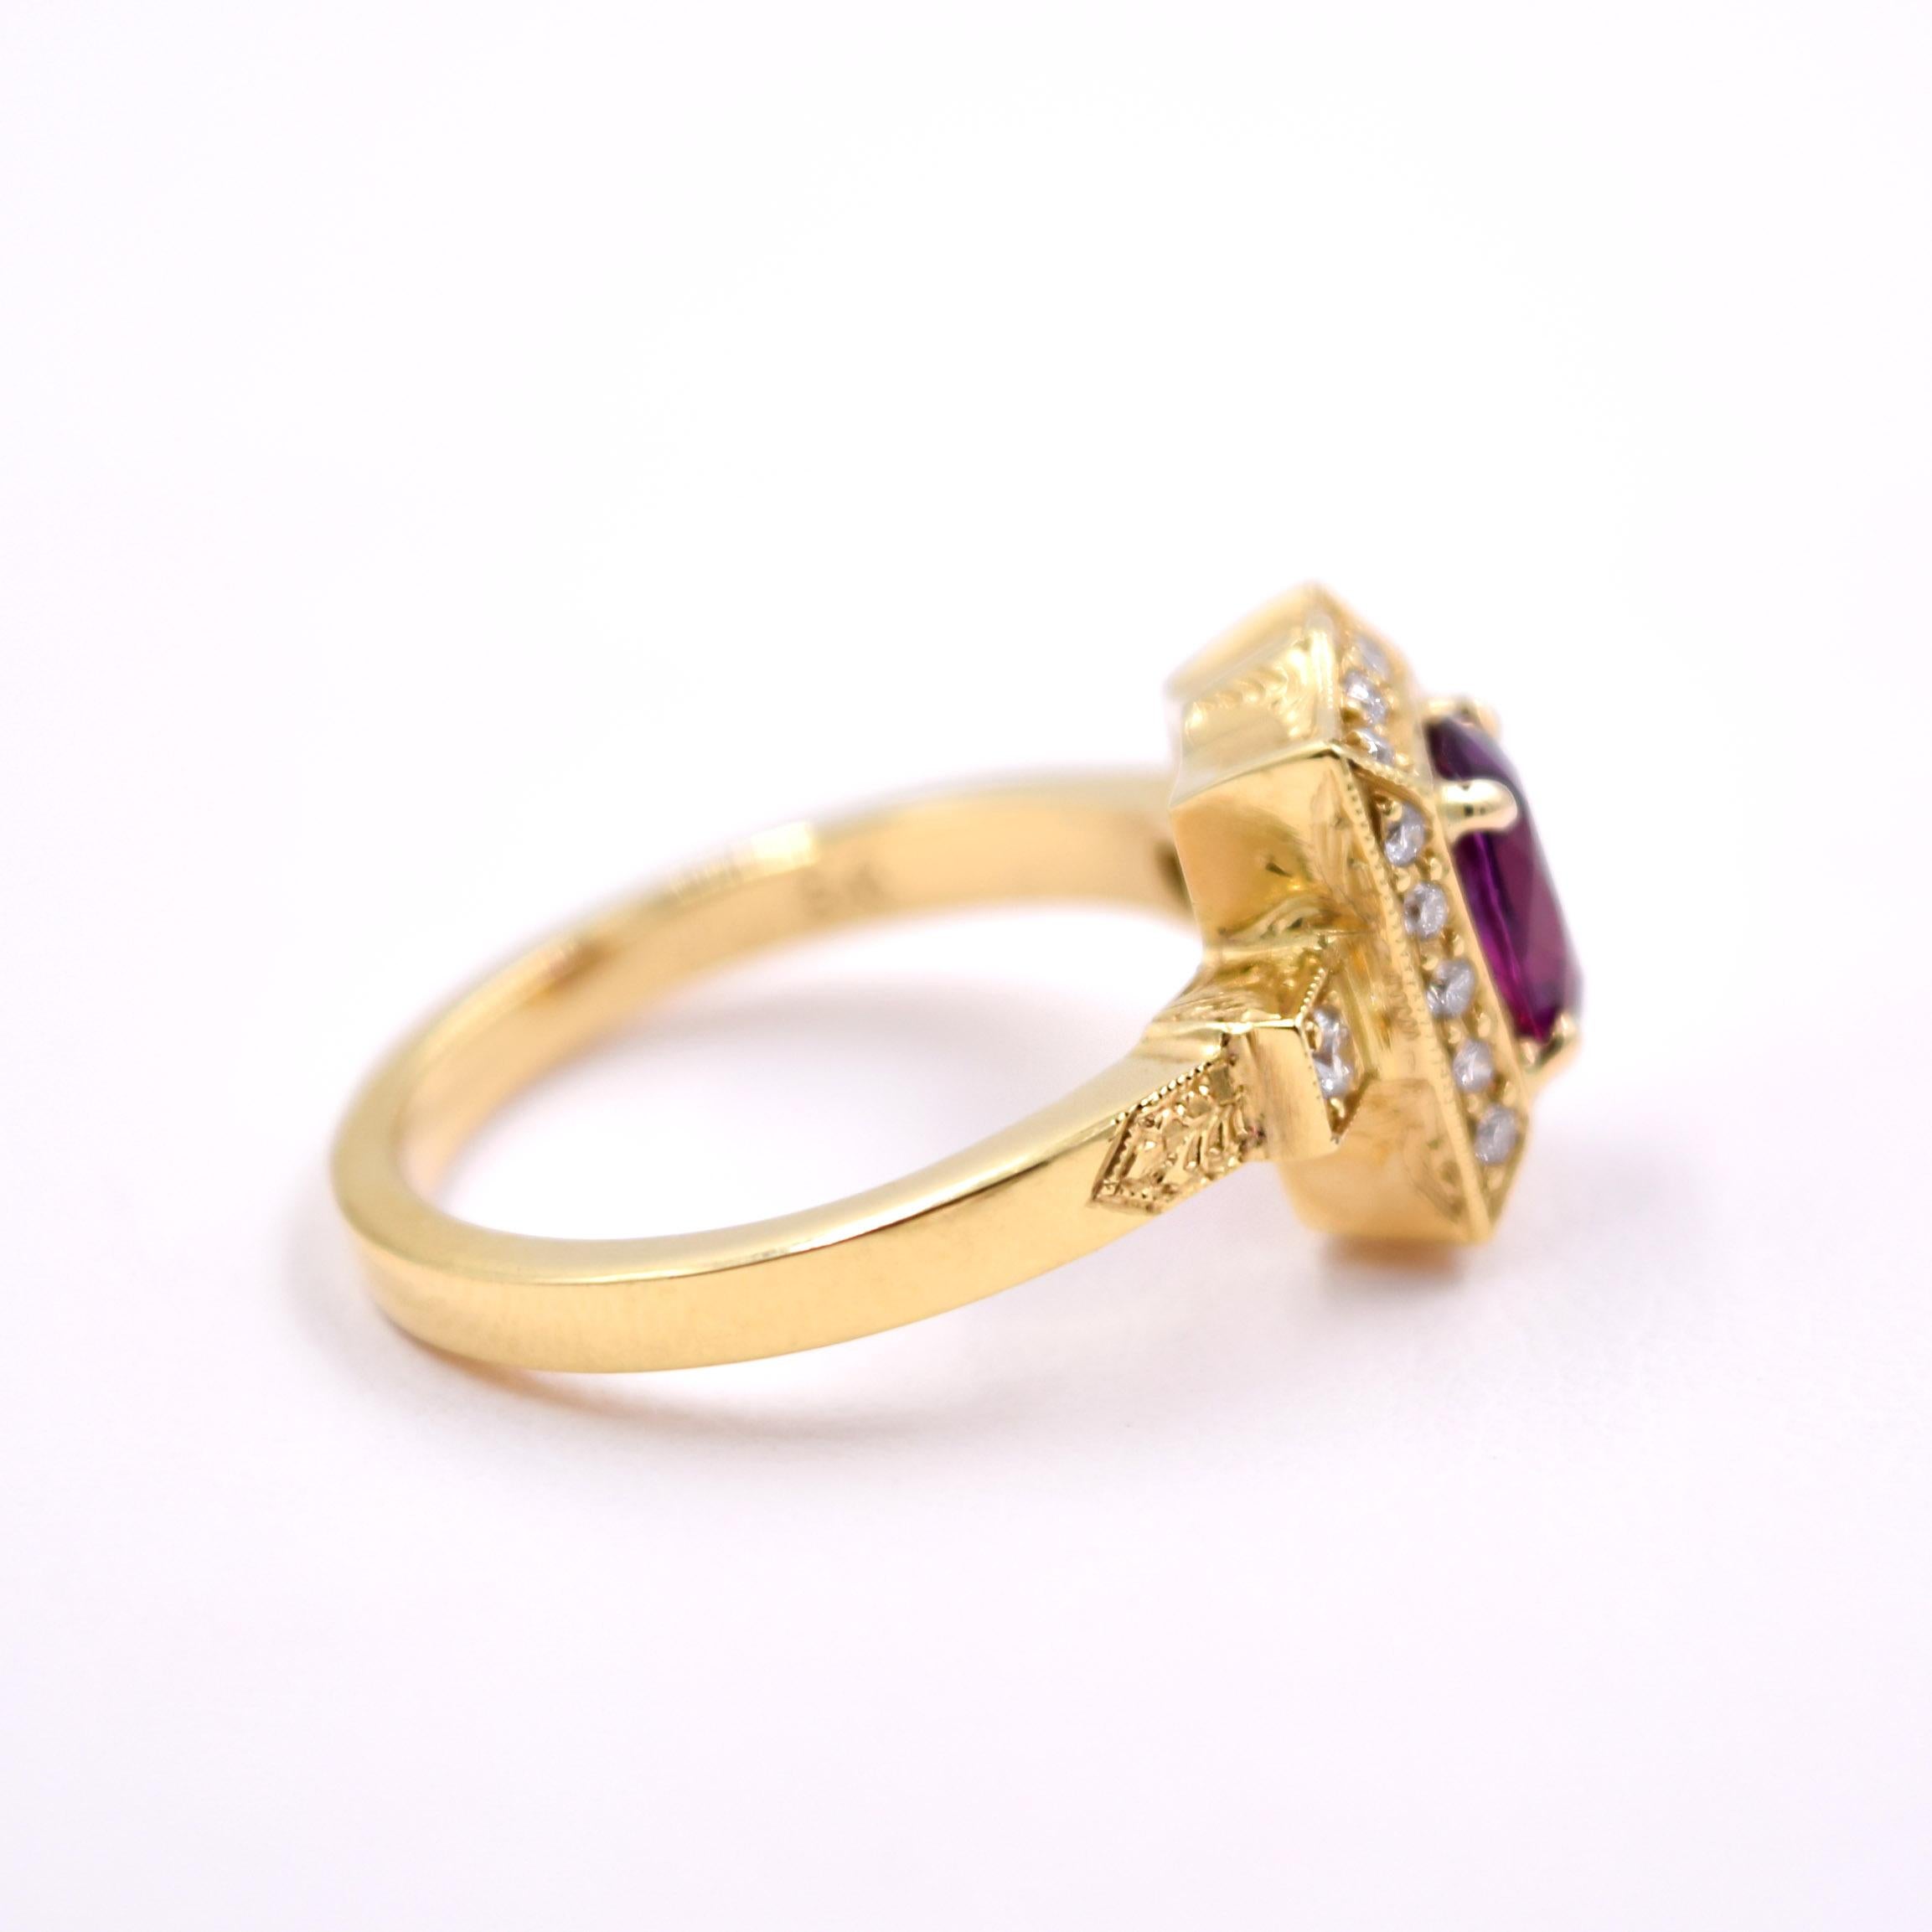 Carl Priolo 1.10 Carat Oval Pink Sapphire and Diamond Statement Ring in 18K Gold In New Condition For Sale In Mill Valley, CA